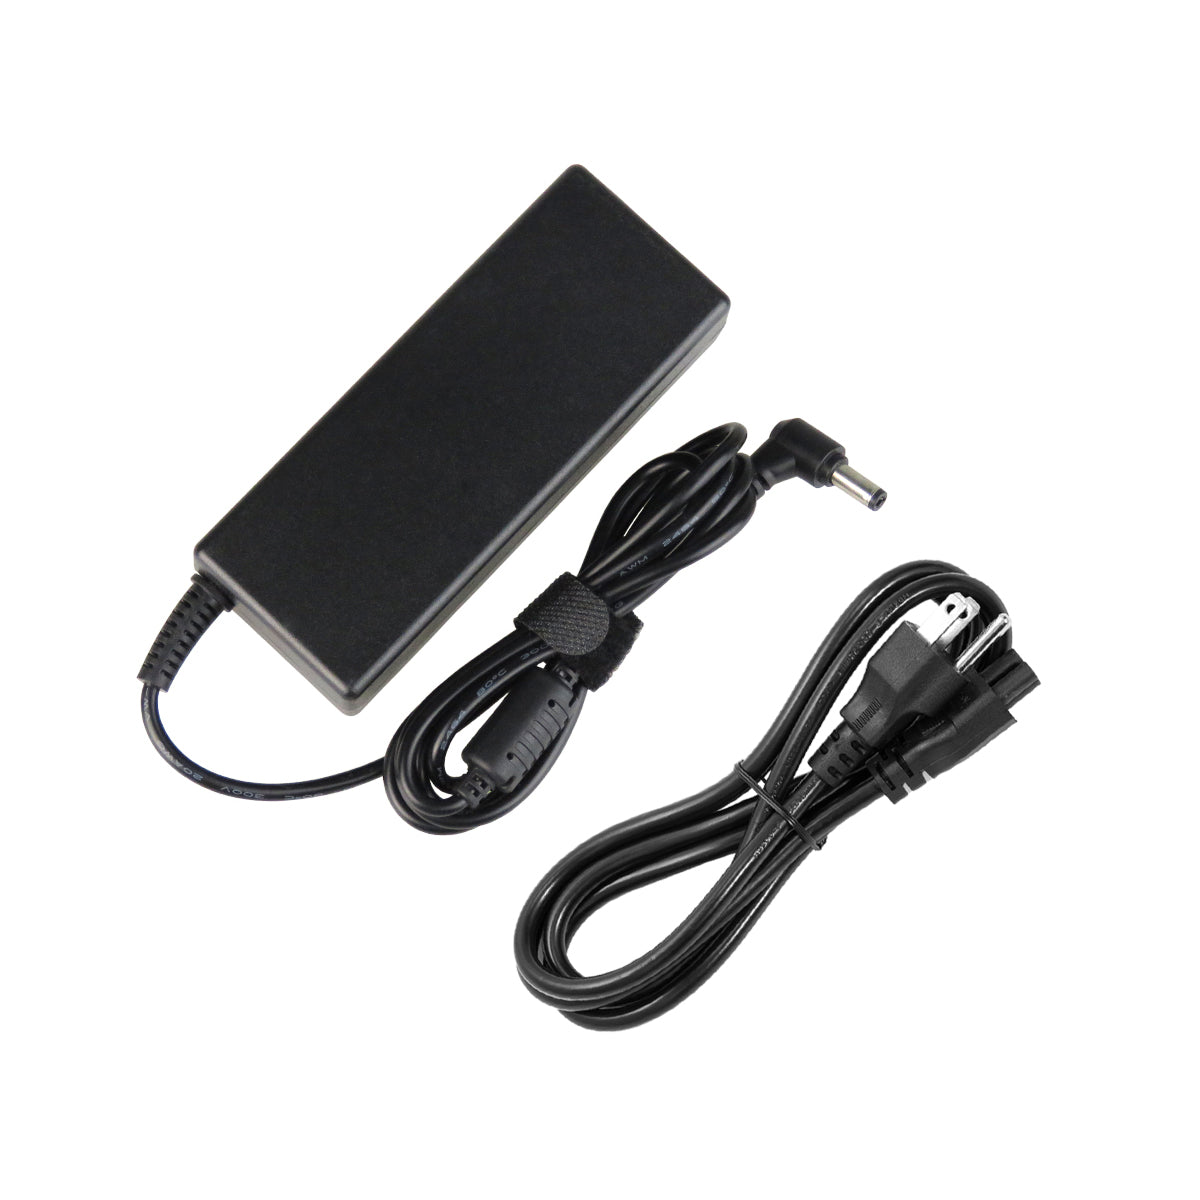 AC Adapter Charger for ASUS N52DA Notebook.